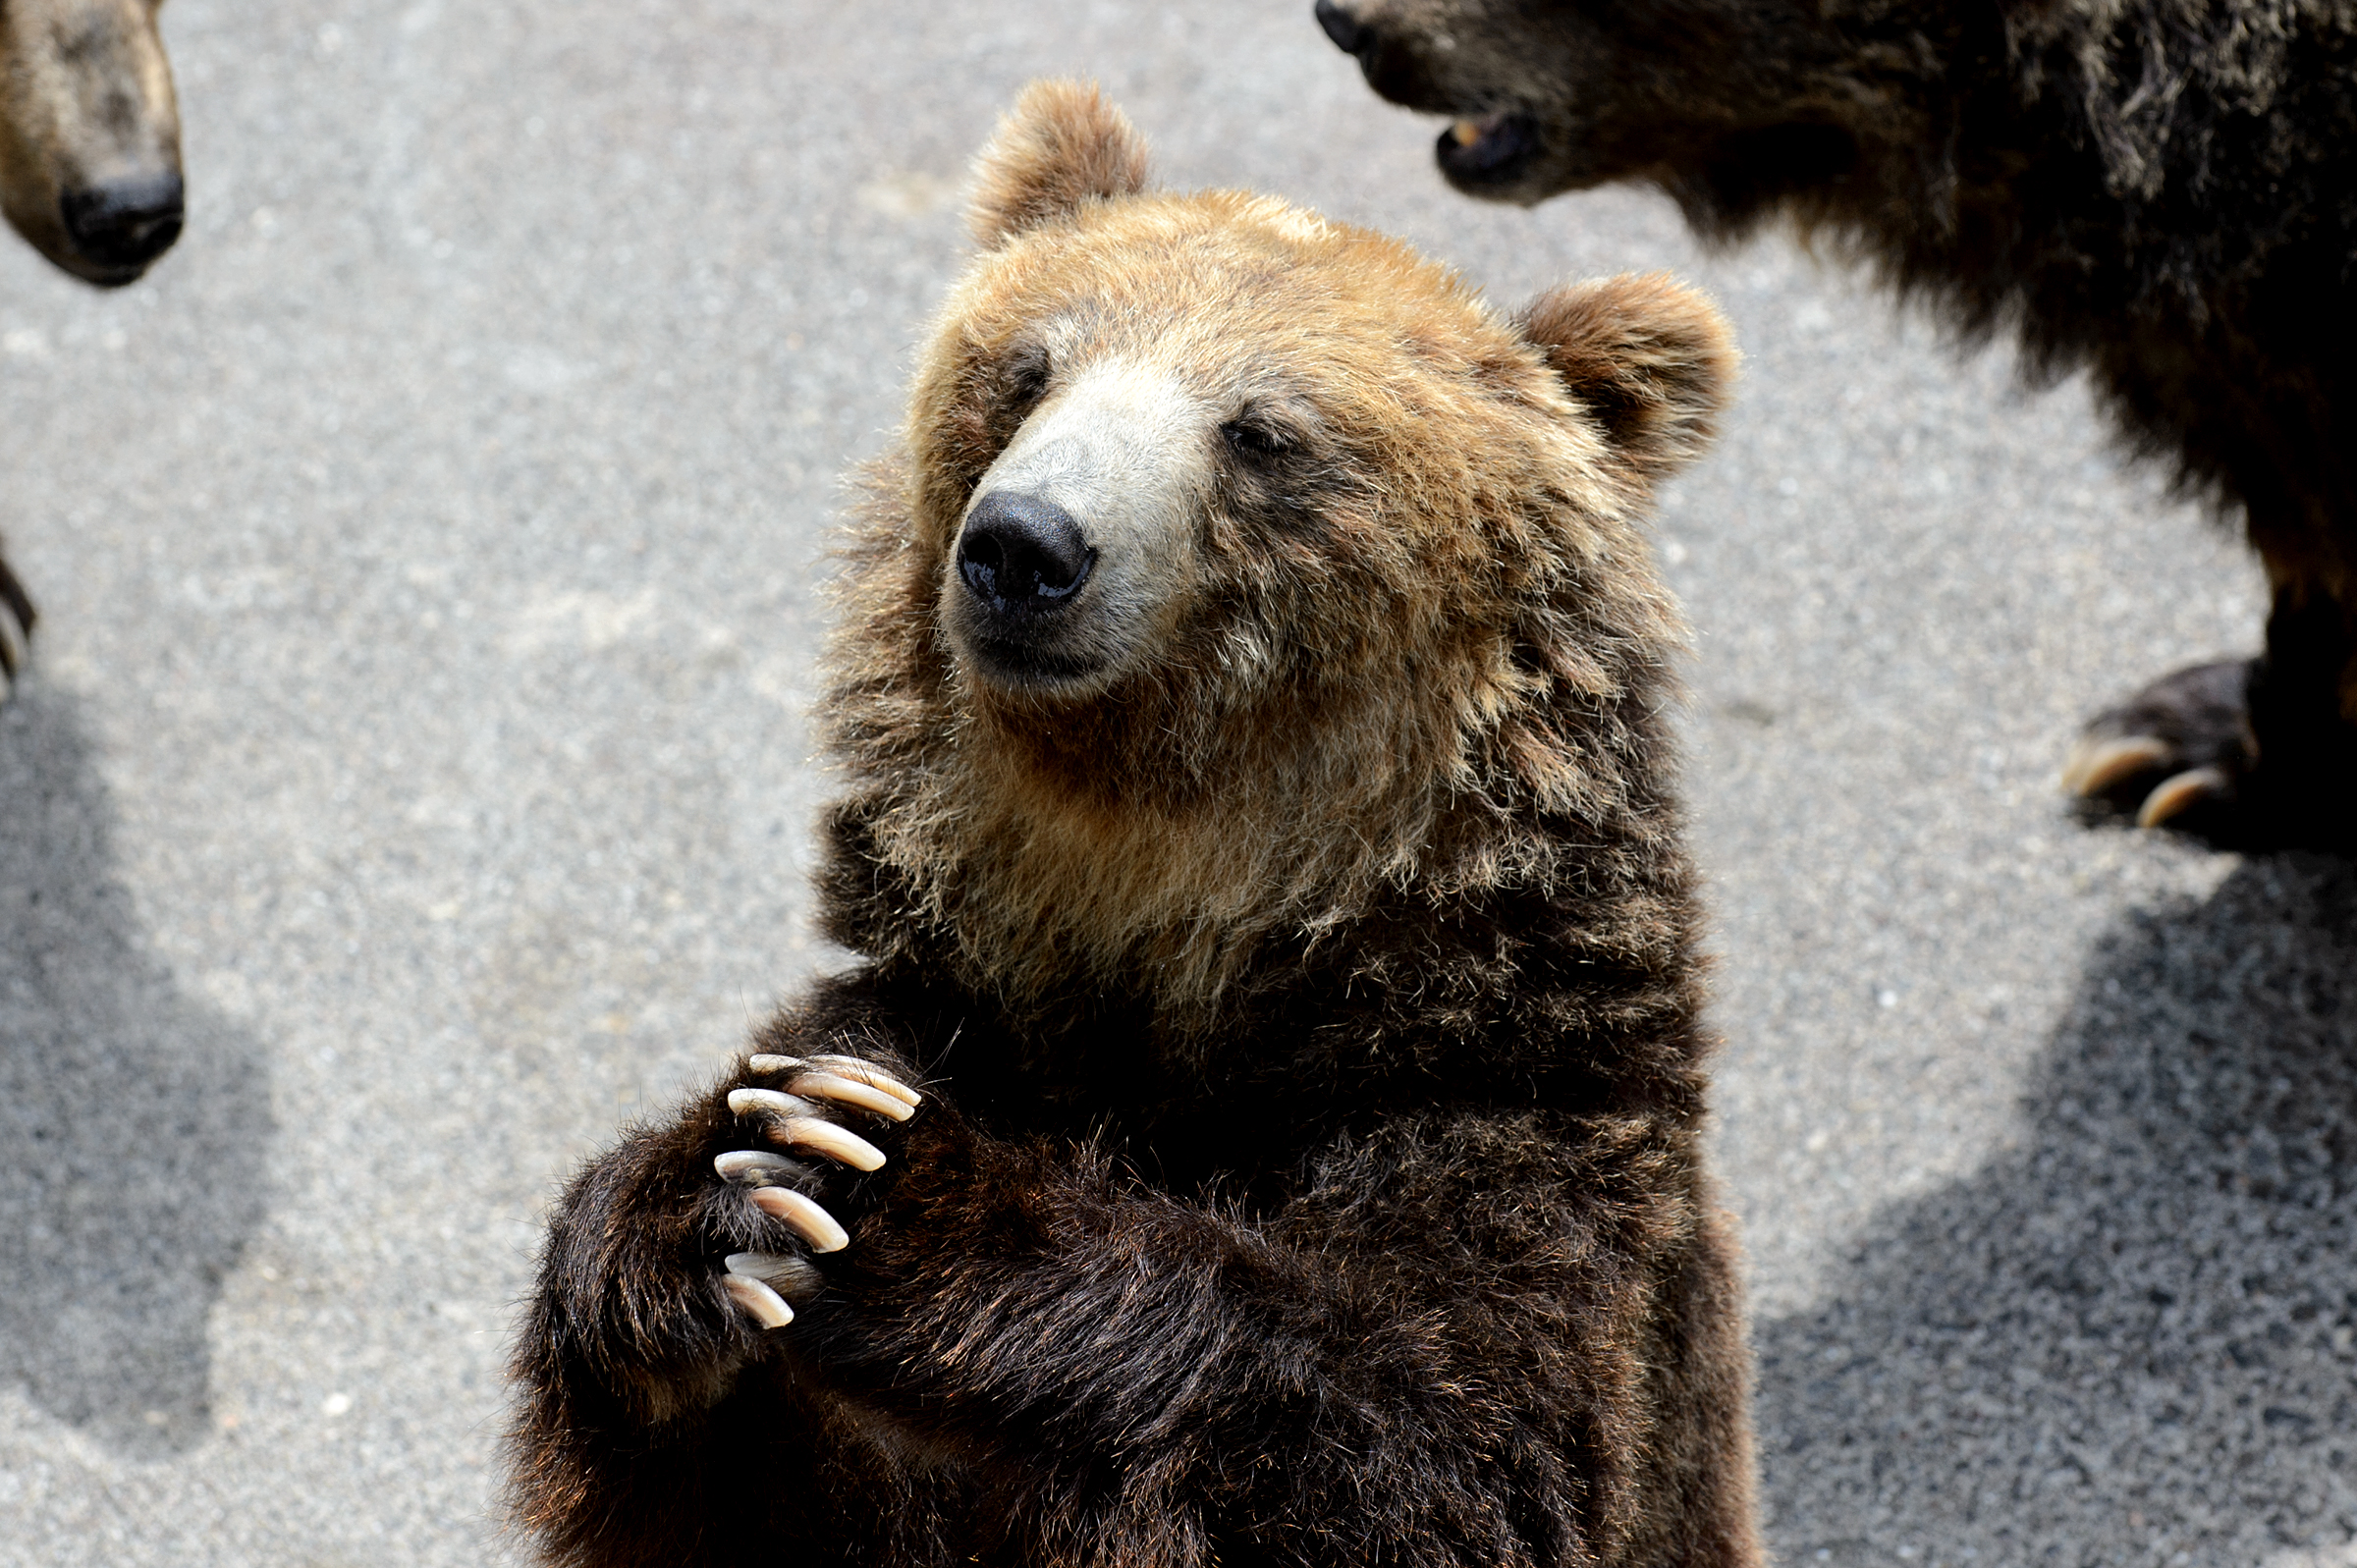 【Valid for one-time use during the period】Showa Shinzan Bear Ranch | Admission